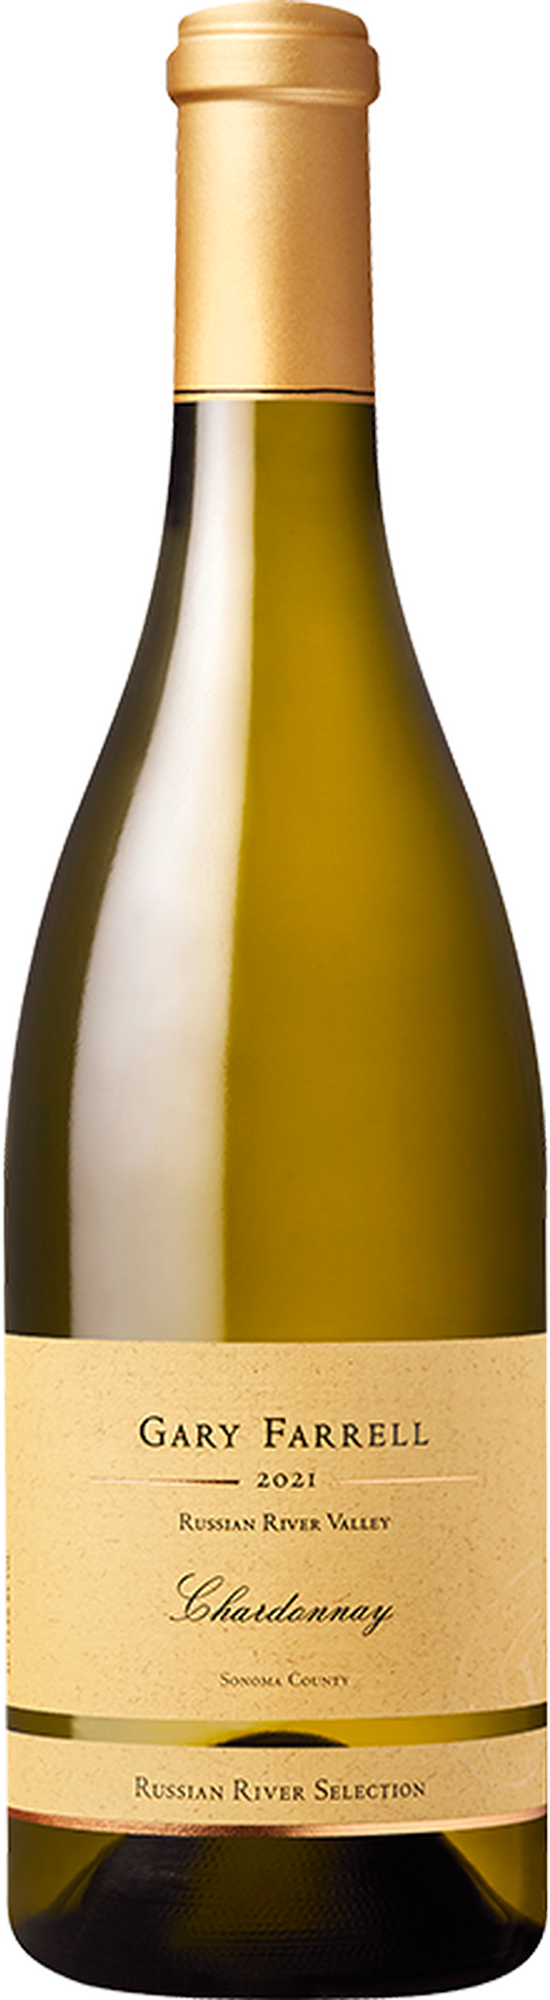 2021 Russian River Selection Chardonnay - 6 Pack